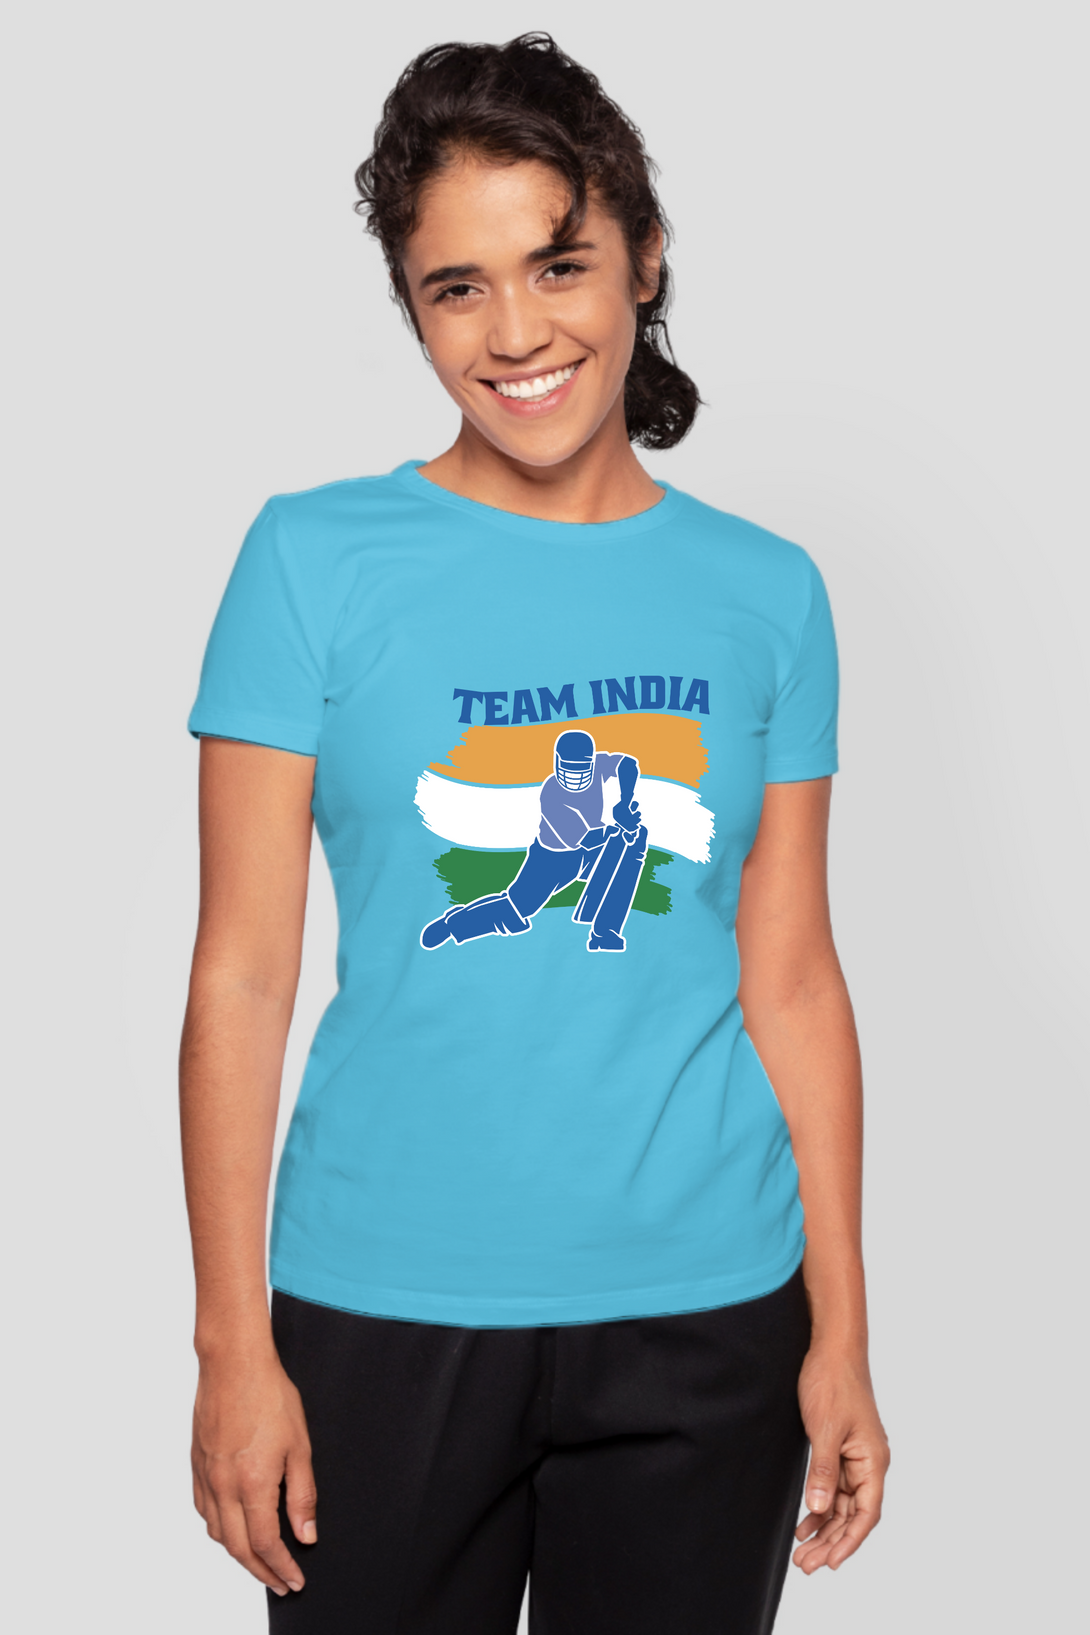 Team India Cricket Printed T-Shirt For Women - WowWaves - 8